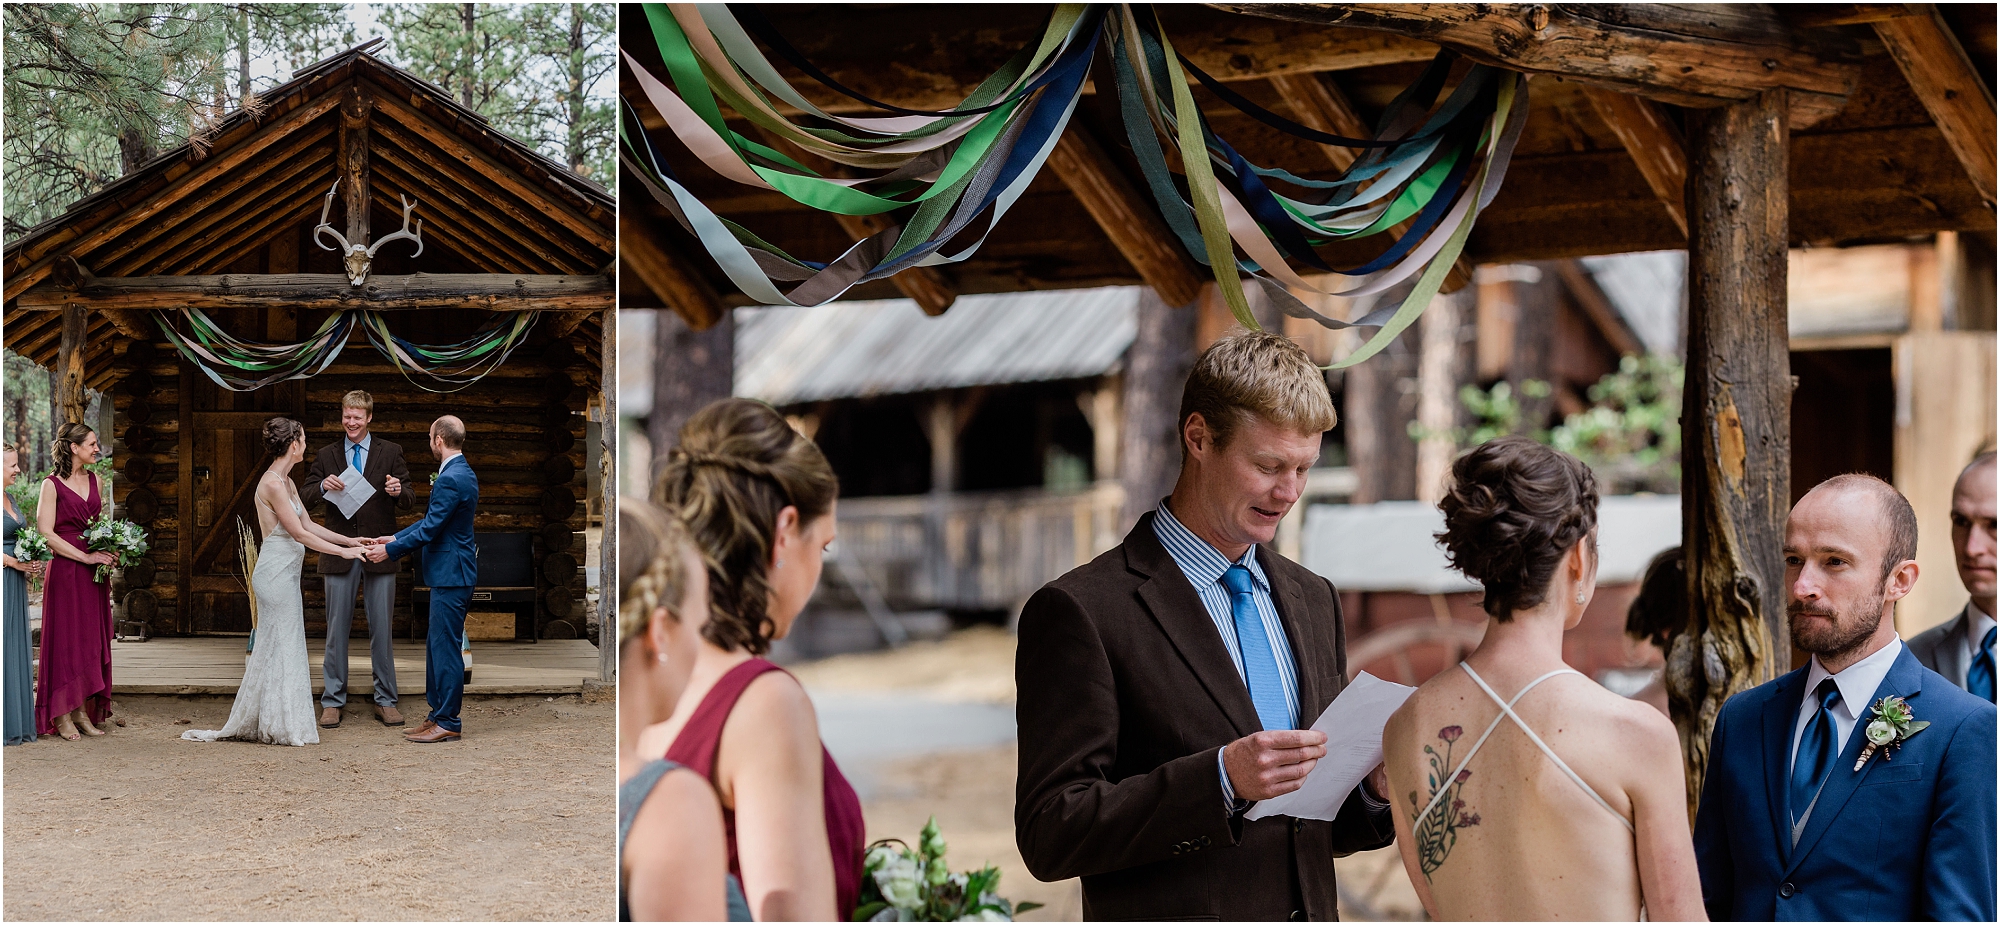 A friend offers a reading at the gorgeous rustic cabin wedding location in Bend, OR. | Erica Swantek Photography